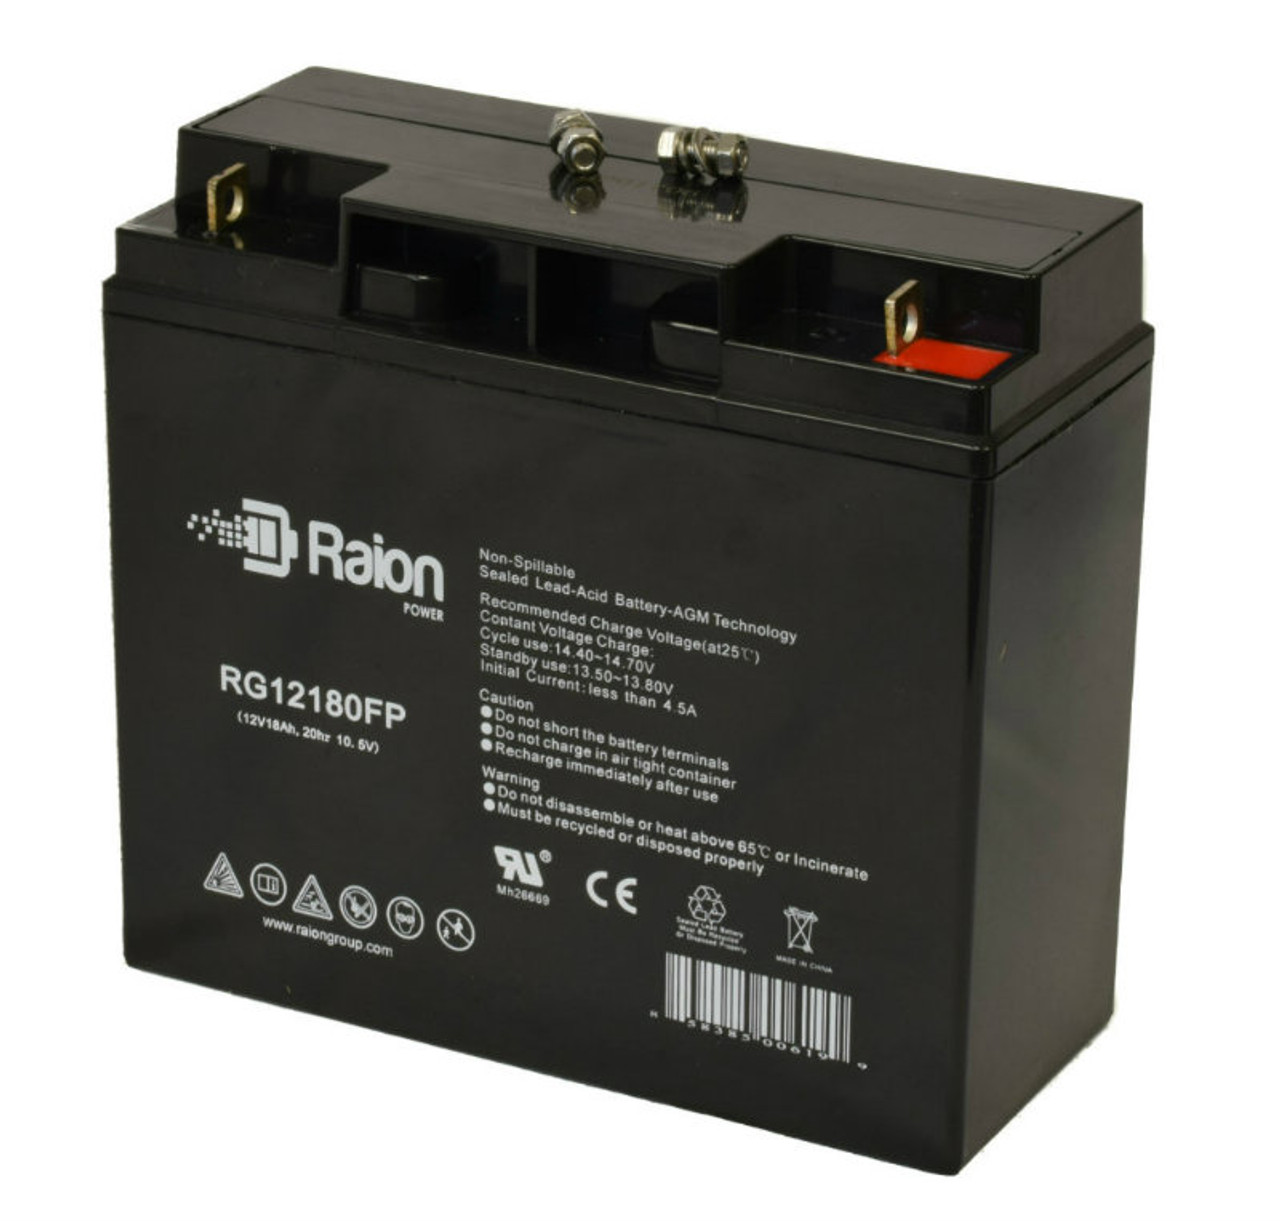 Raion Power Replacement 12V 18Ah Battery for Energenie BAT-12V17AH - 1 Pack